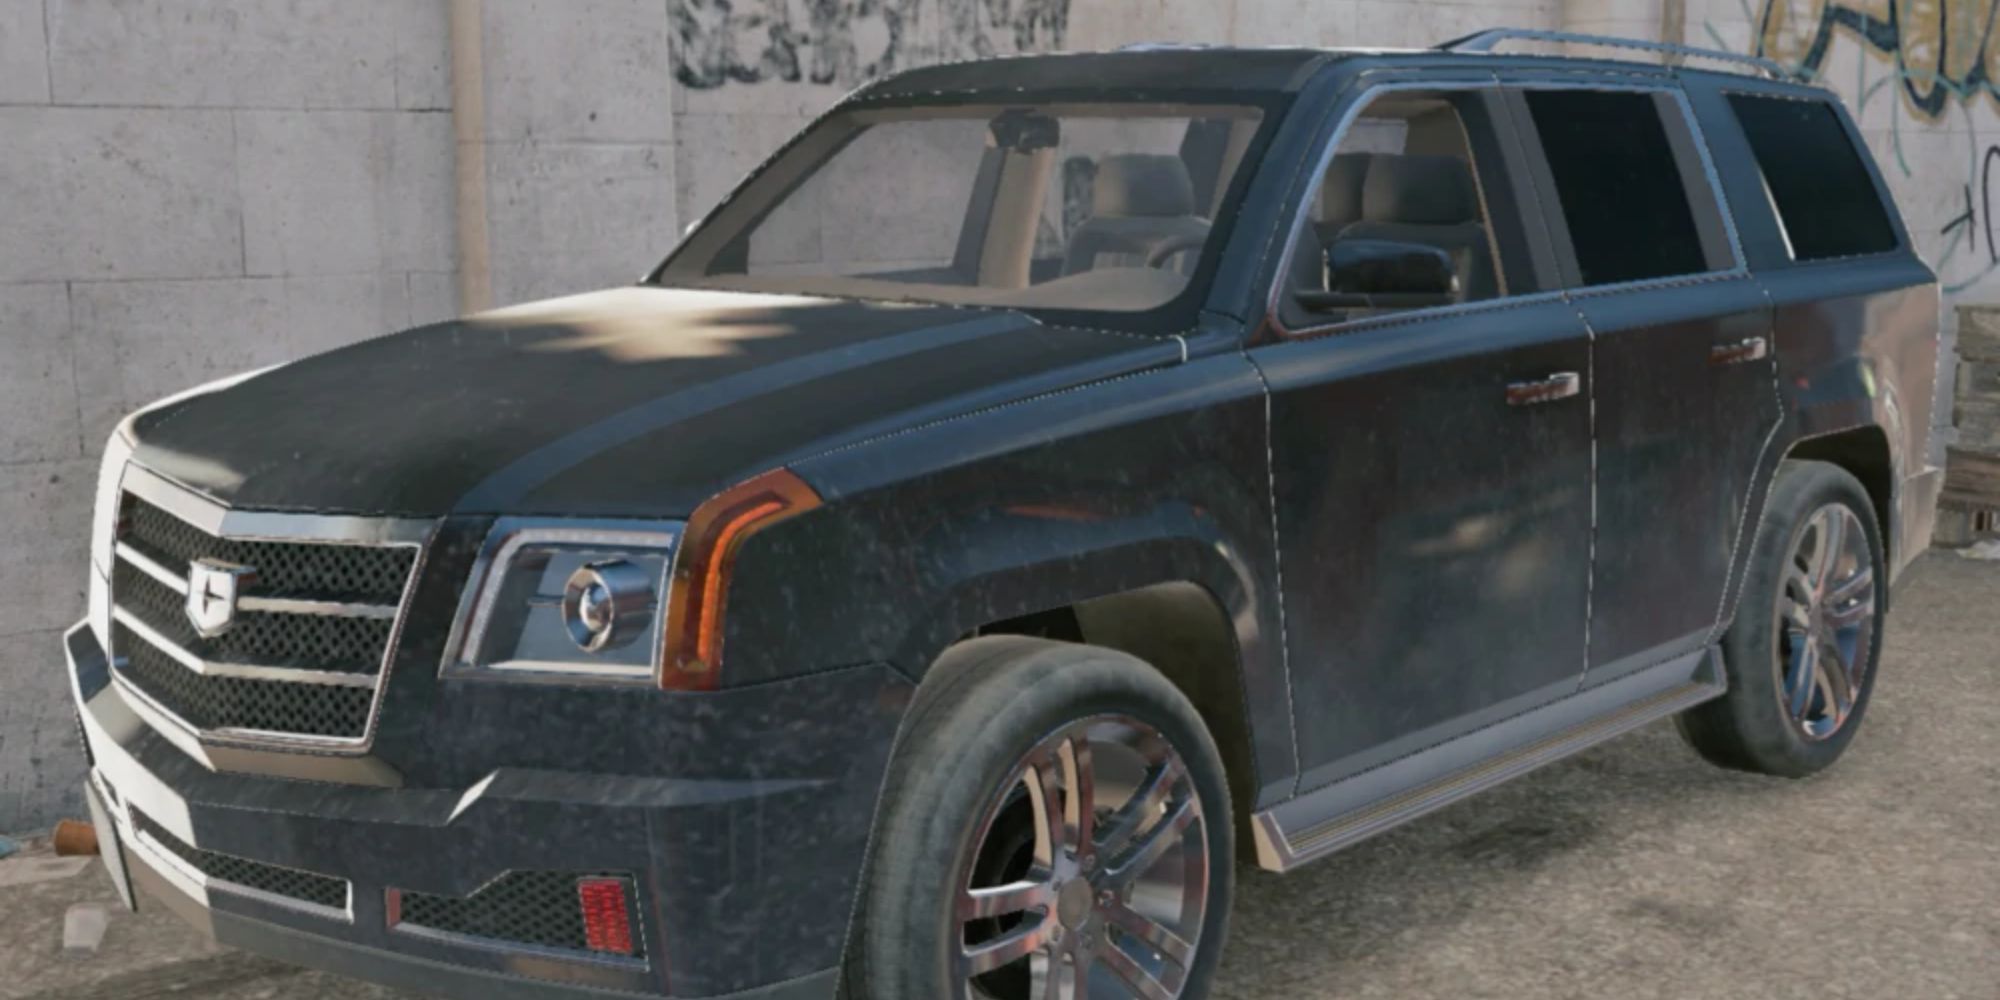 A dirty TBT-7000 from Watch Dogs 2 parked by a building